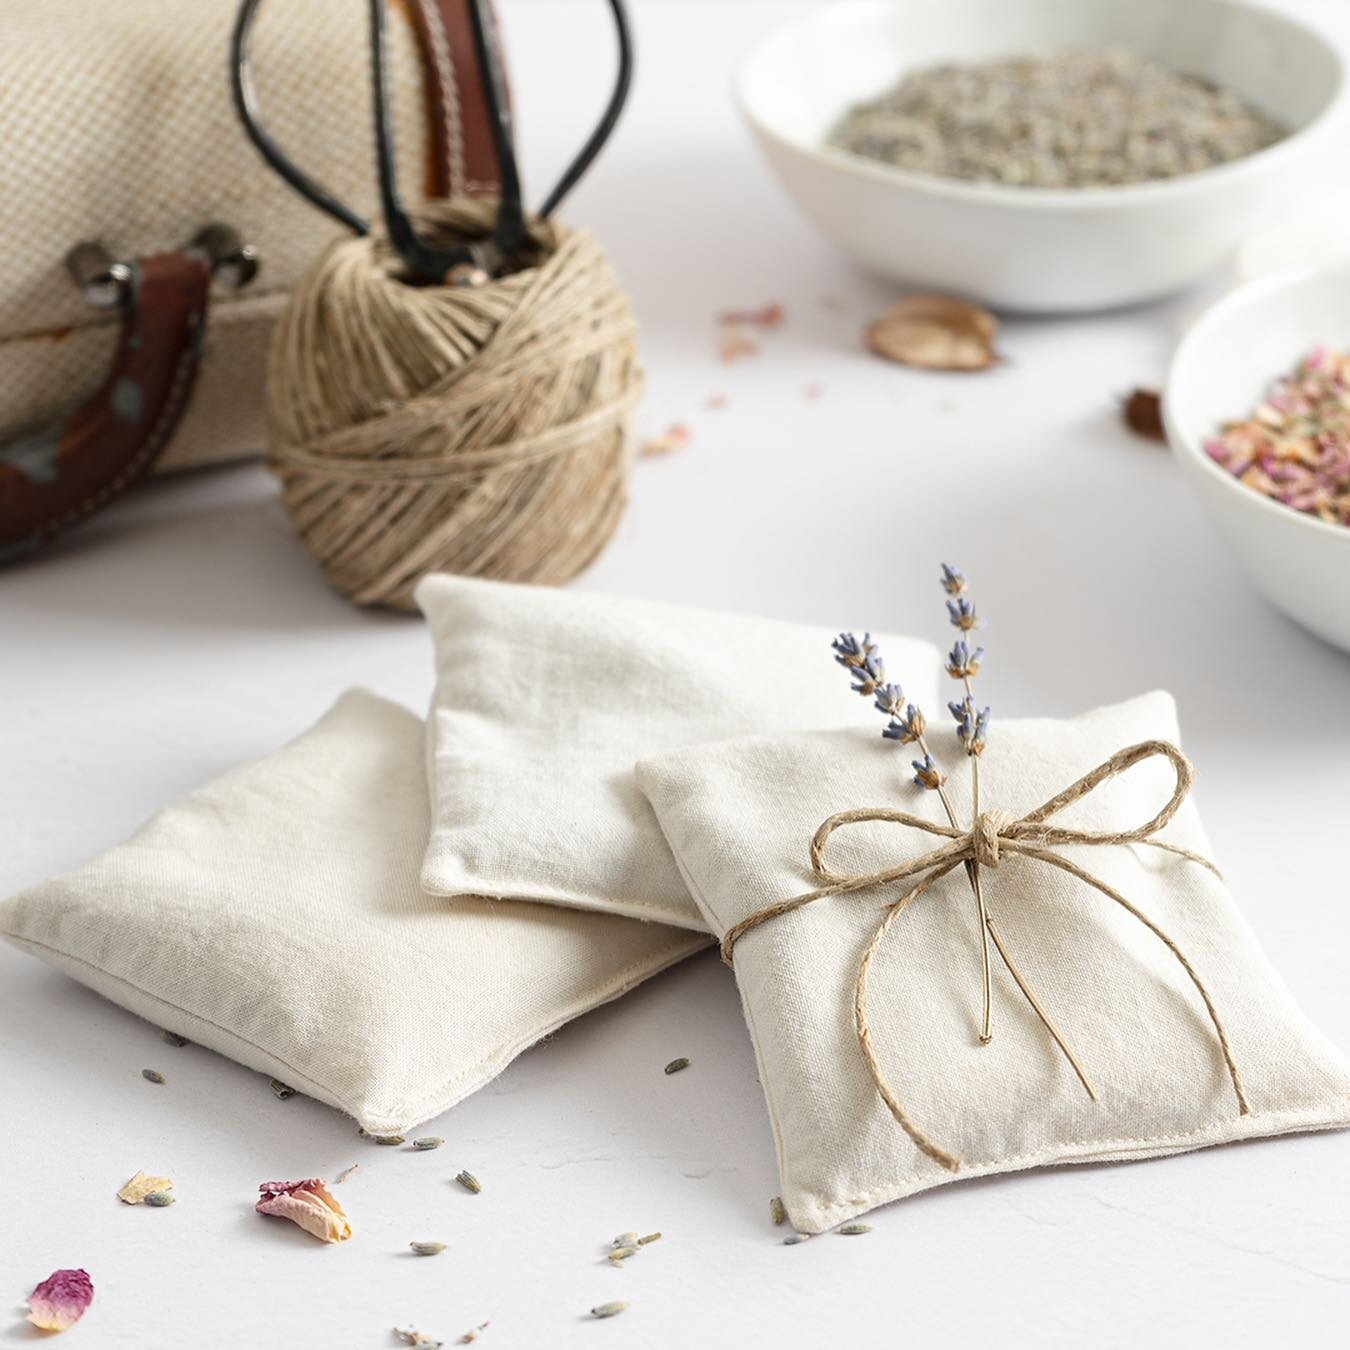 Although everyone is about pumpkin spice this and caramel apple that this time of year, there is always room for floral aromas. Join me in crafting  these simple DIY floral sachets to place in closets, drawers, storage bins, or anywhere else that nee